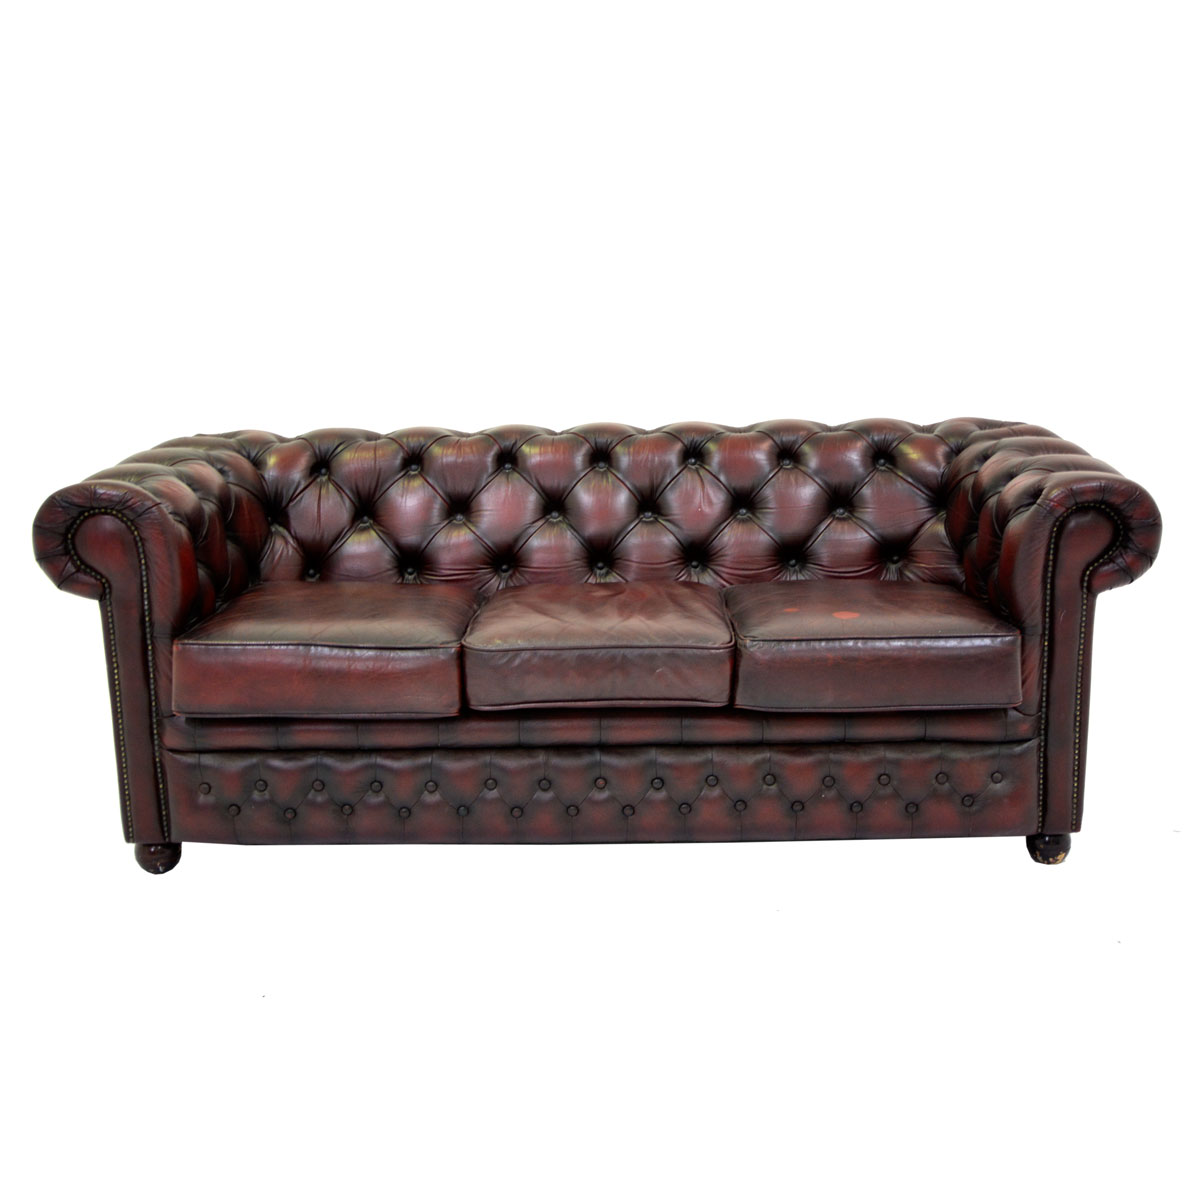 3 Seat Chesterfield